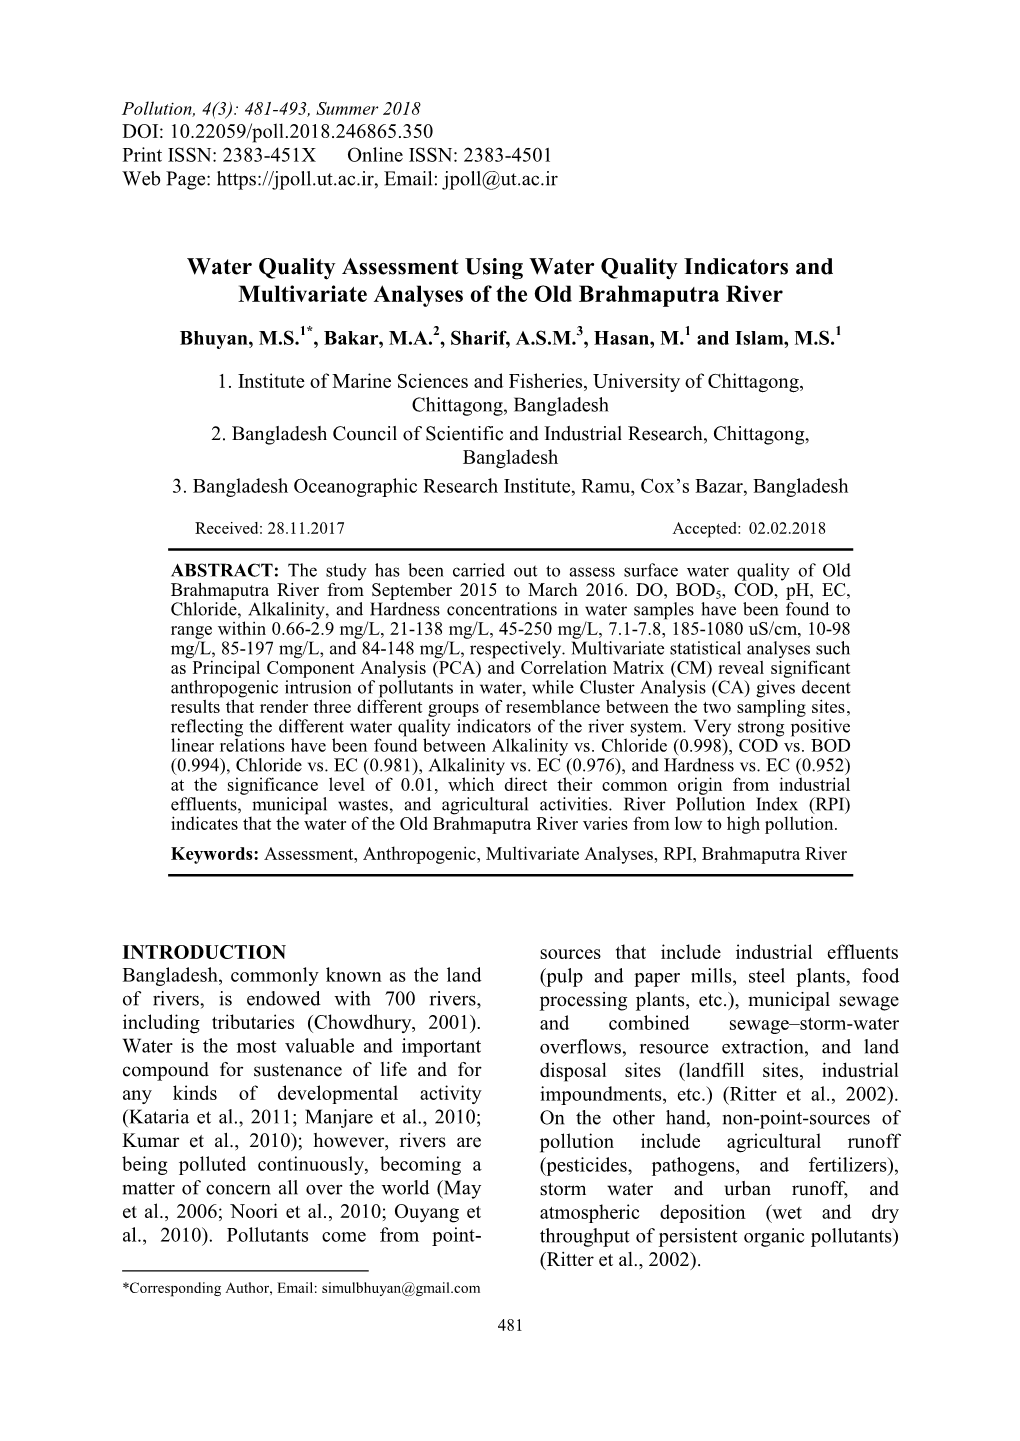 Water Quality Assessment Using Water Quality Indicators and Multivariate Analyses of the Old Brahmaputra River